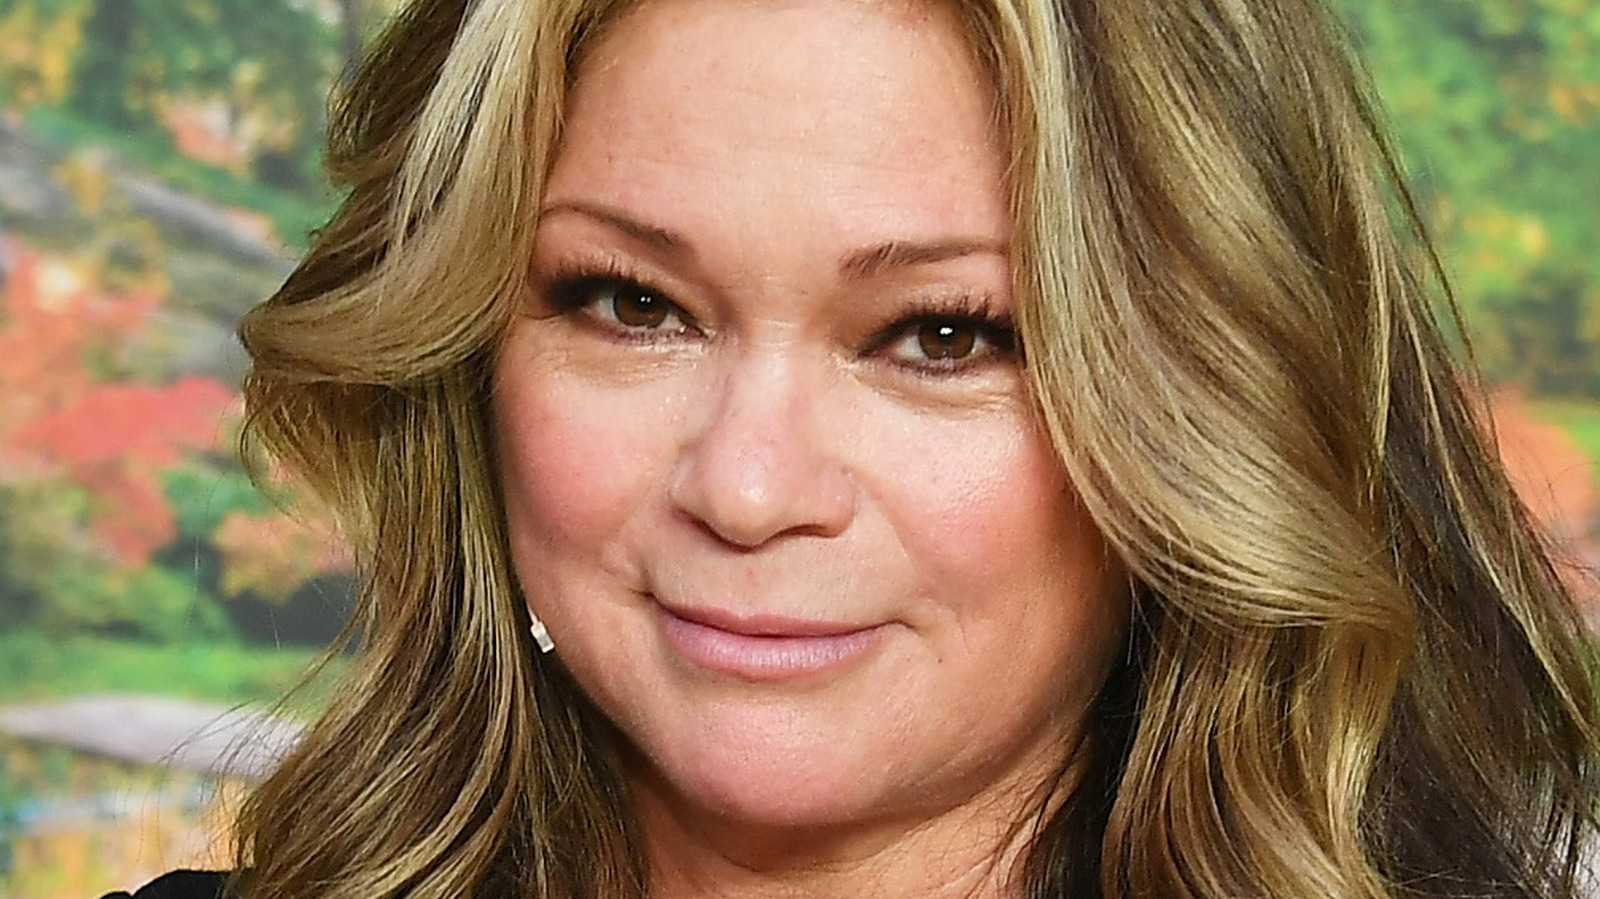 Valerie Bertinelli Revealed That Food Network Canceled Her Cooking Show – Tasting Table